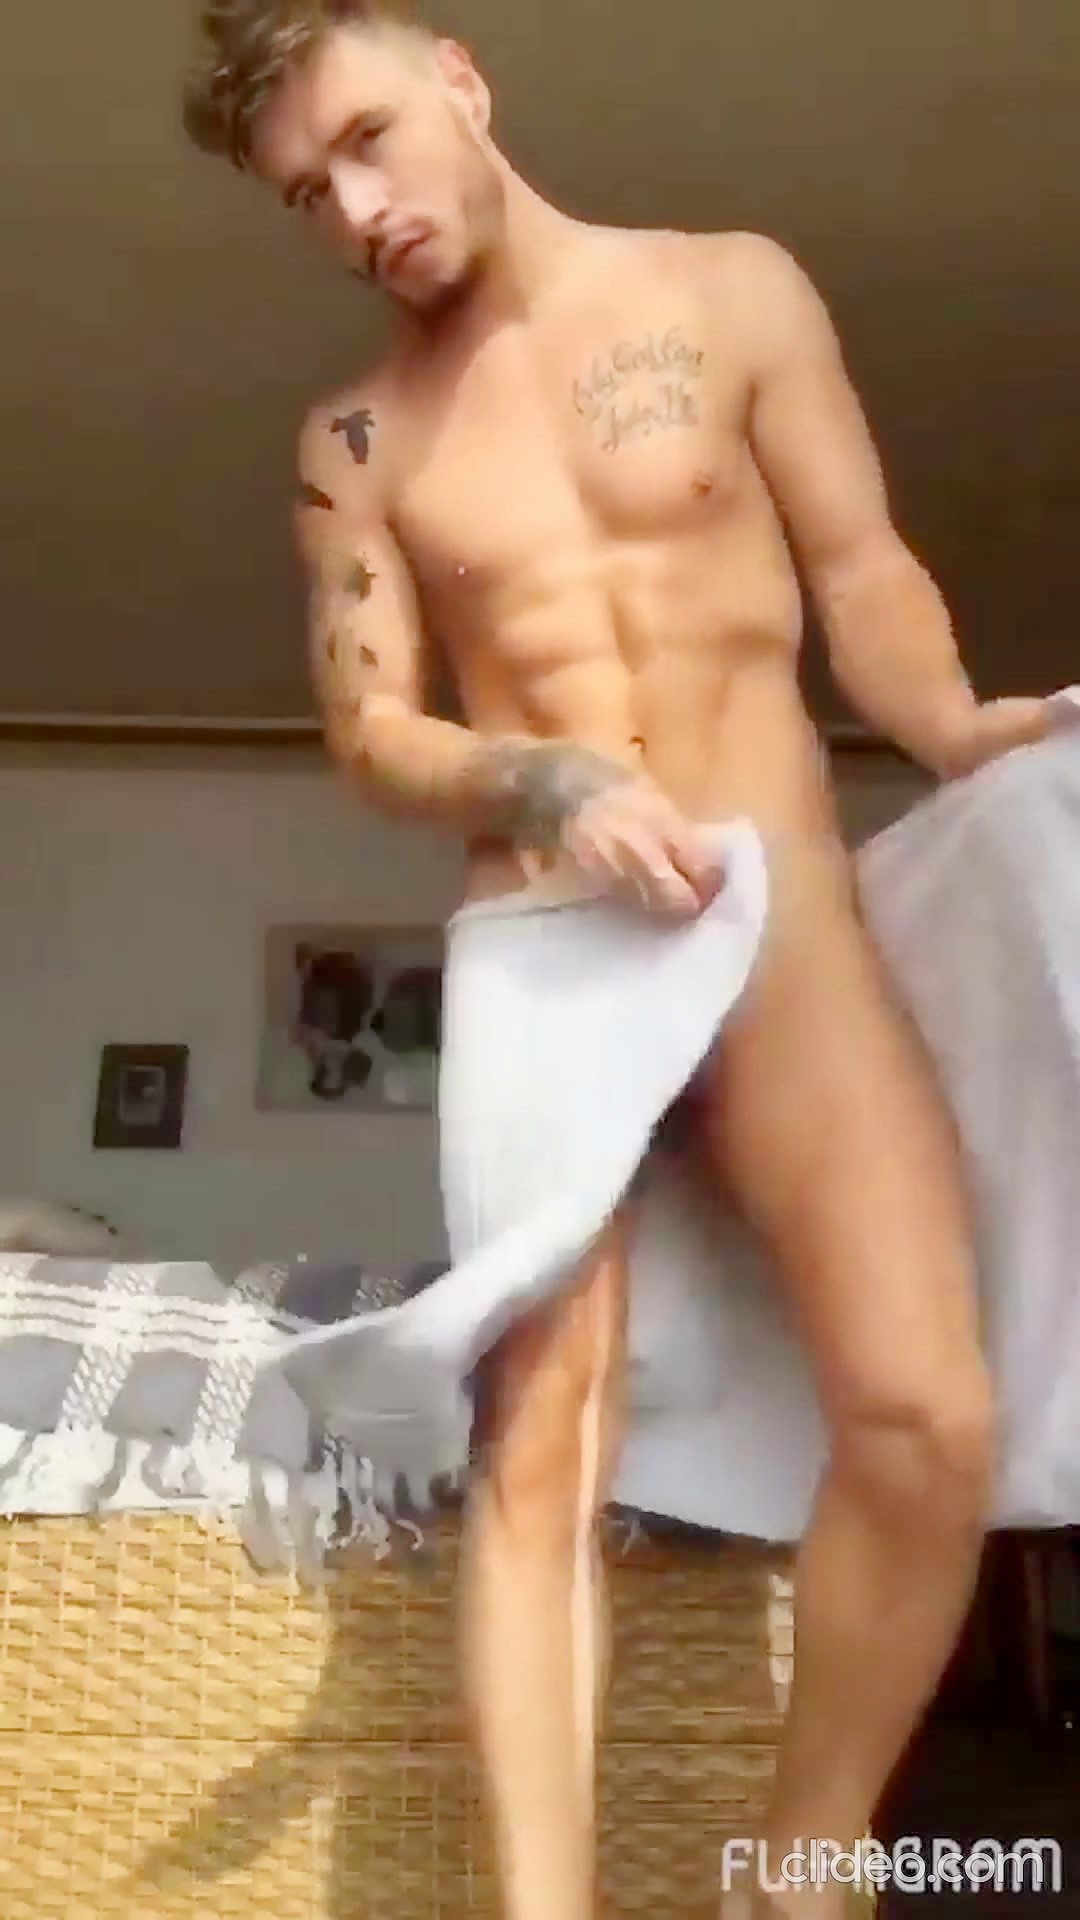 If you like a "big cock reveal" clip, here's 30 of them for you to enjoy